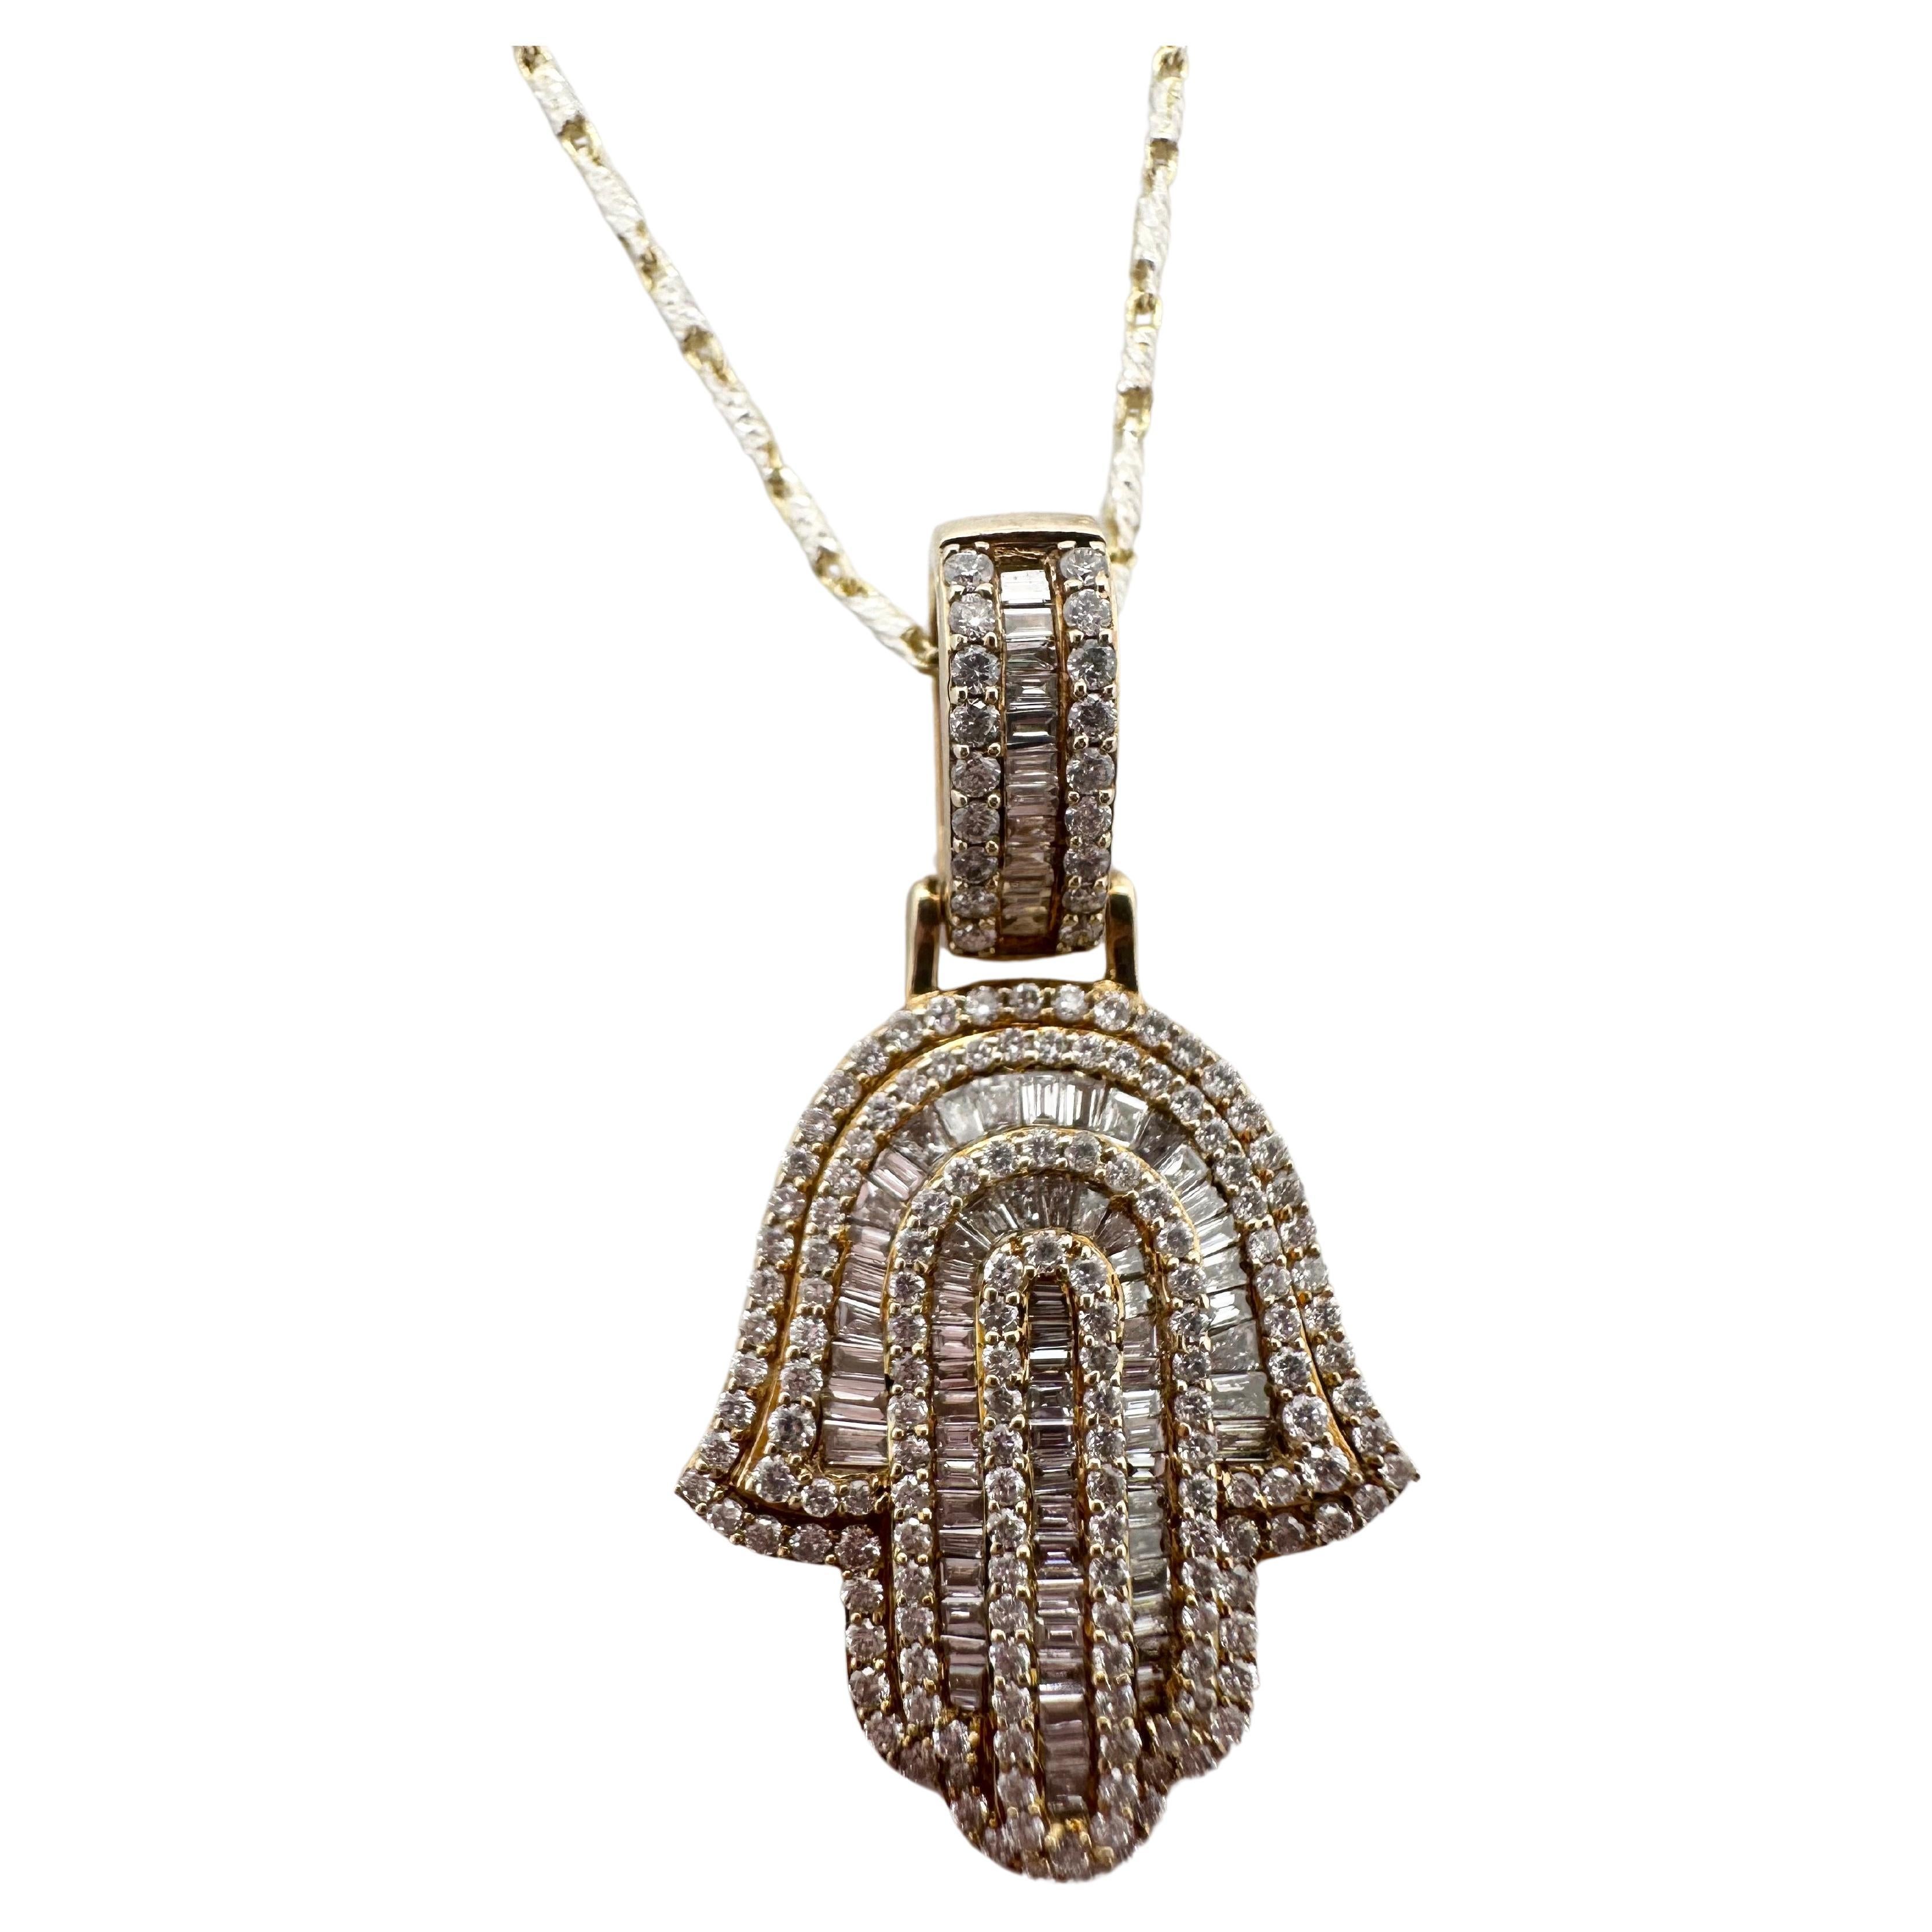 Hamsa diamond pendant necklace 14KT yellow gold 1.21ct 16" necklace For Sale